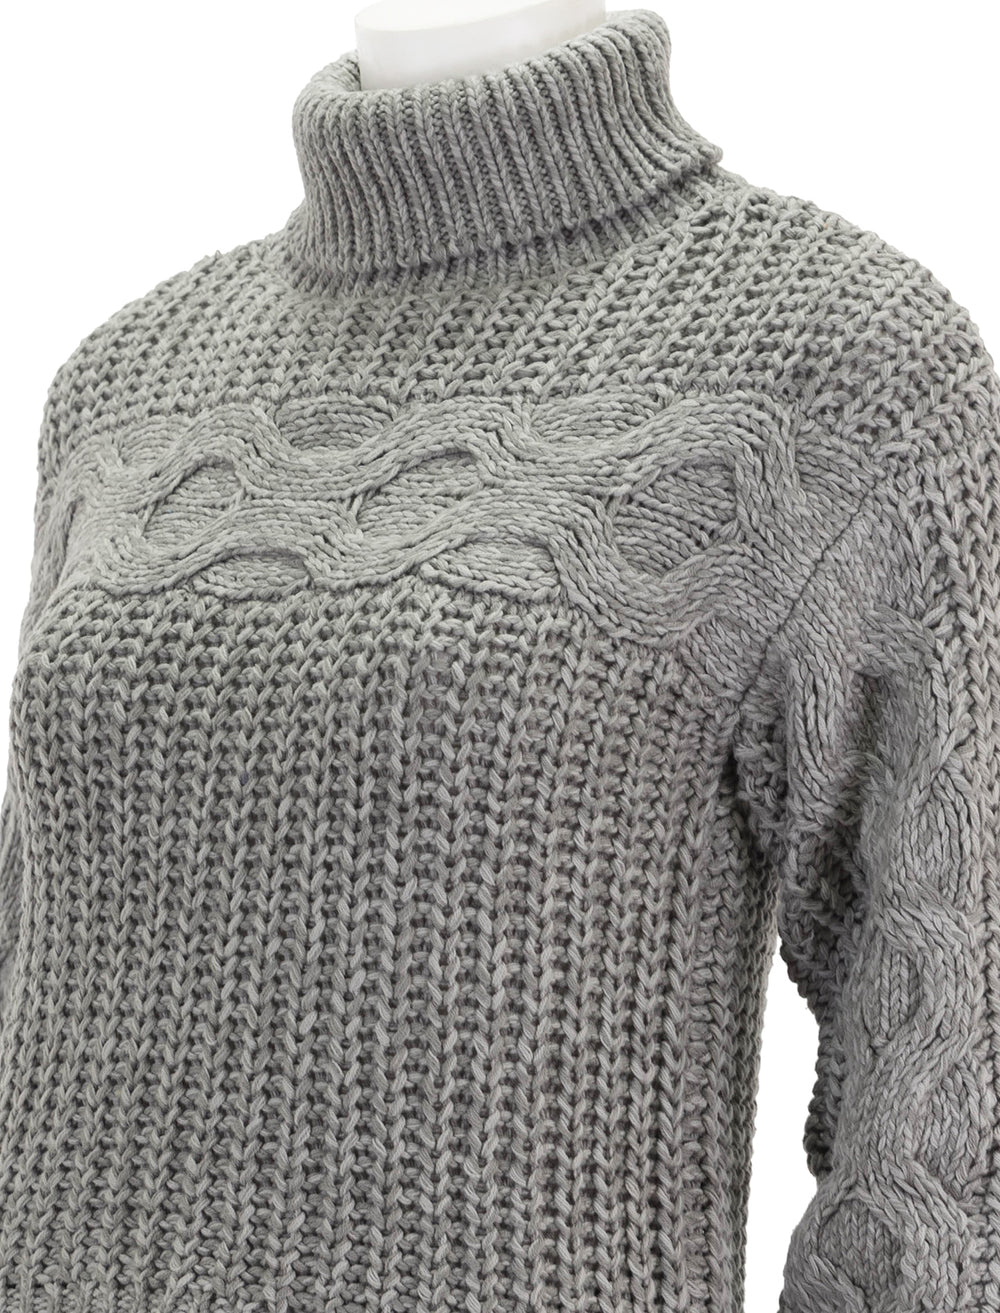 Close-up view of STAUD's vernacular sweater in heather grey.